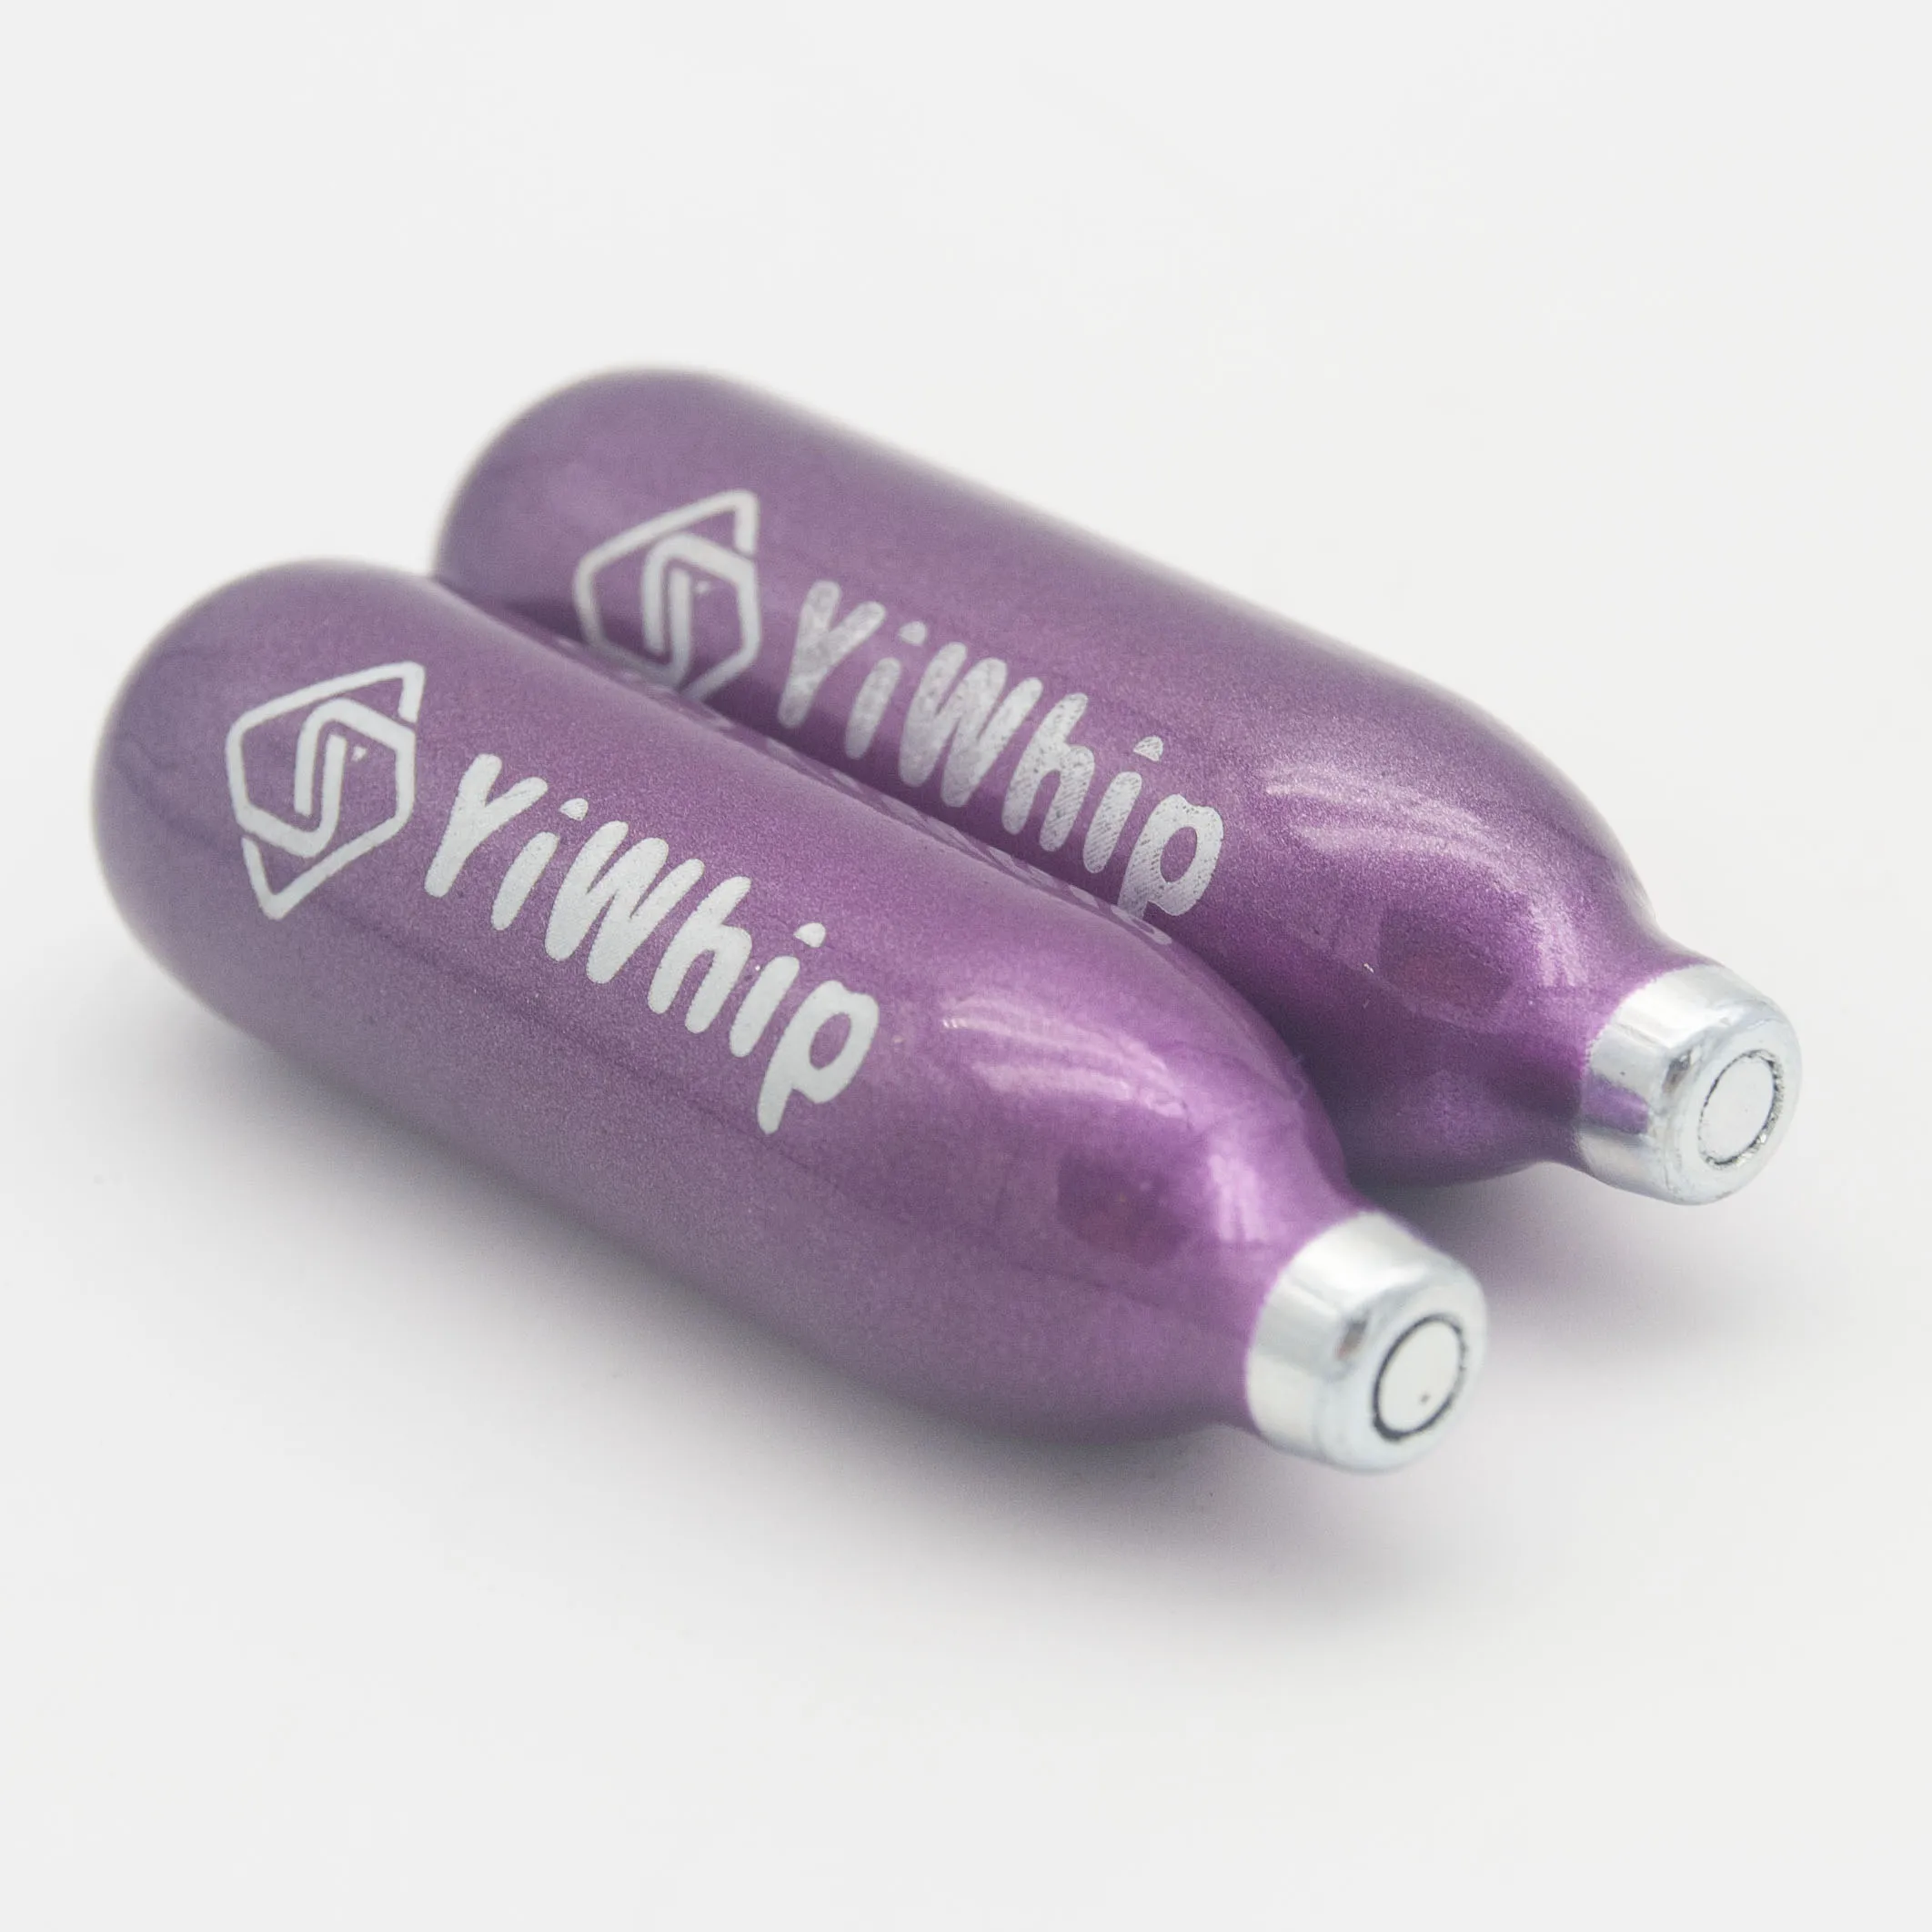 Yiwhip Wholesale Ultra Pure High Quality Whipped 8g 9g Cream Chargers EU Canisters Fast Delivery